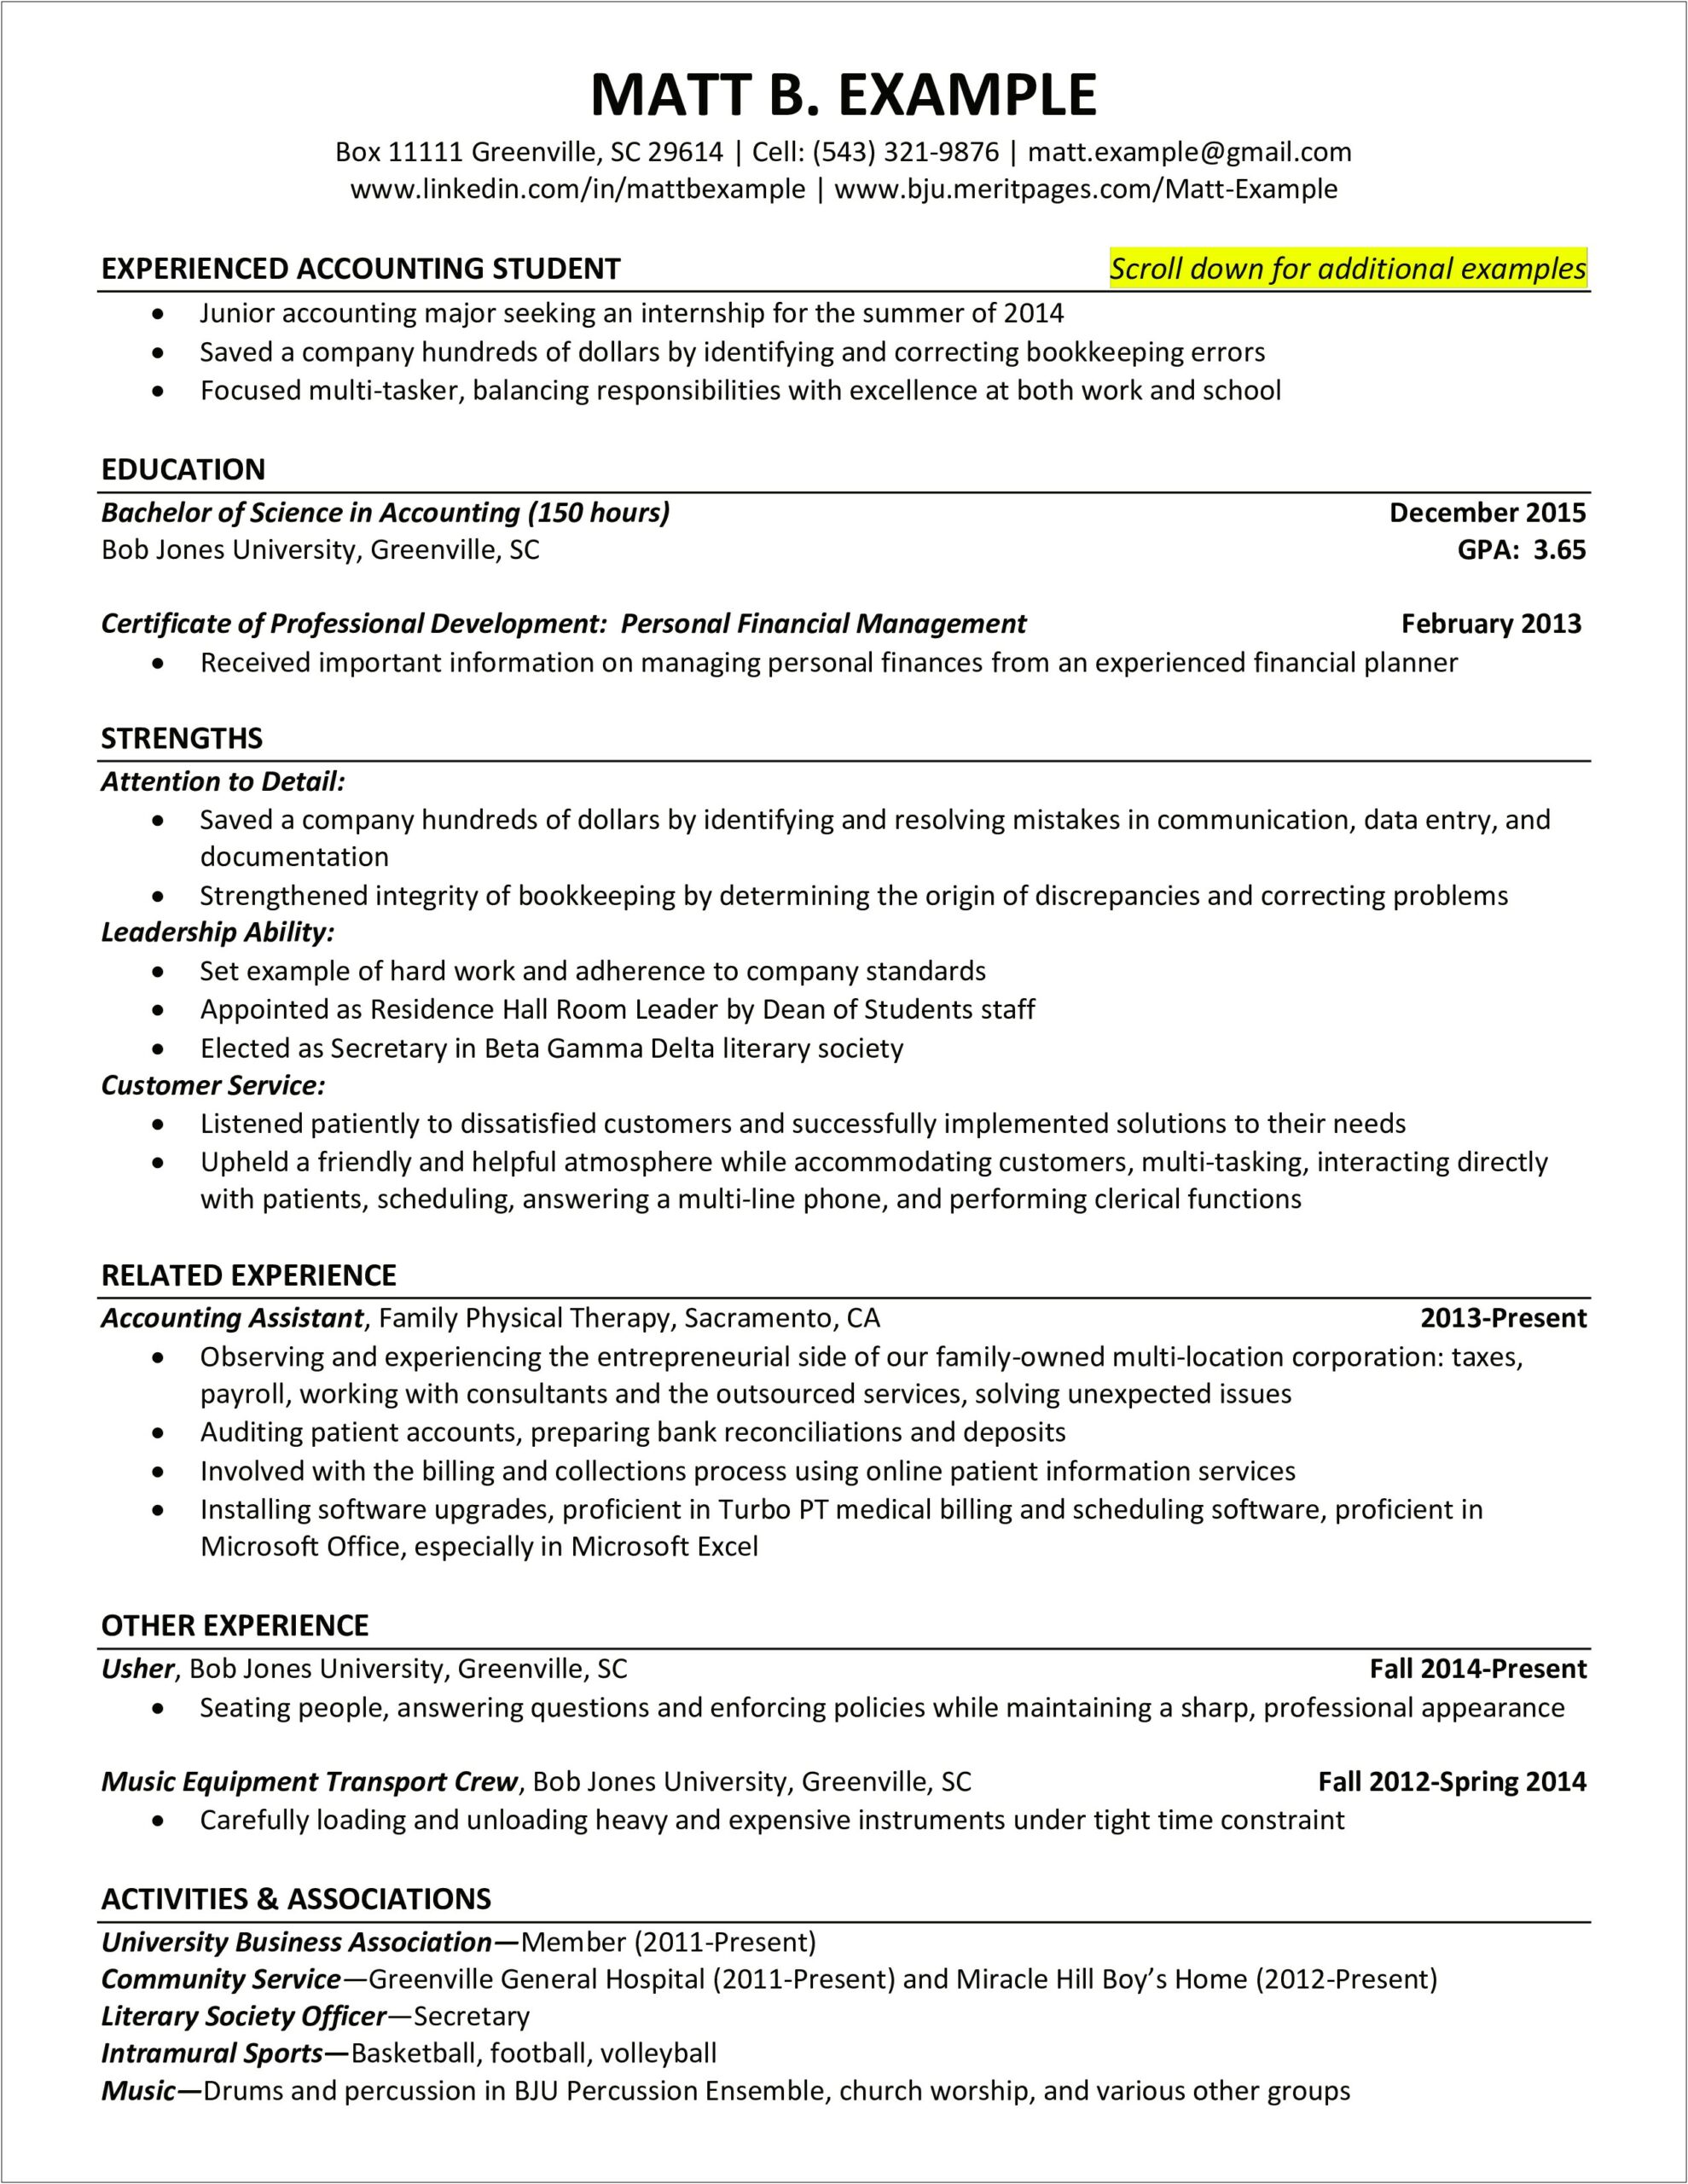 Best Resume For Accounting Graduate